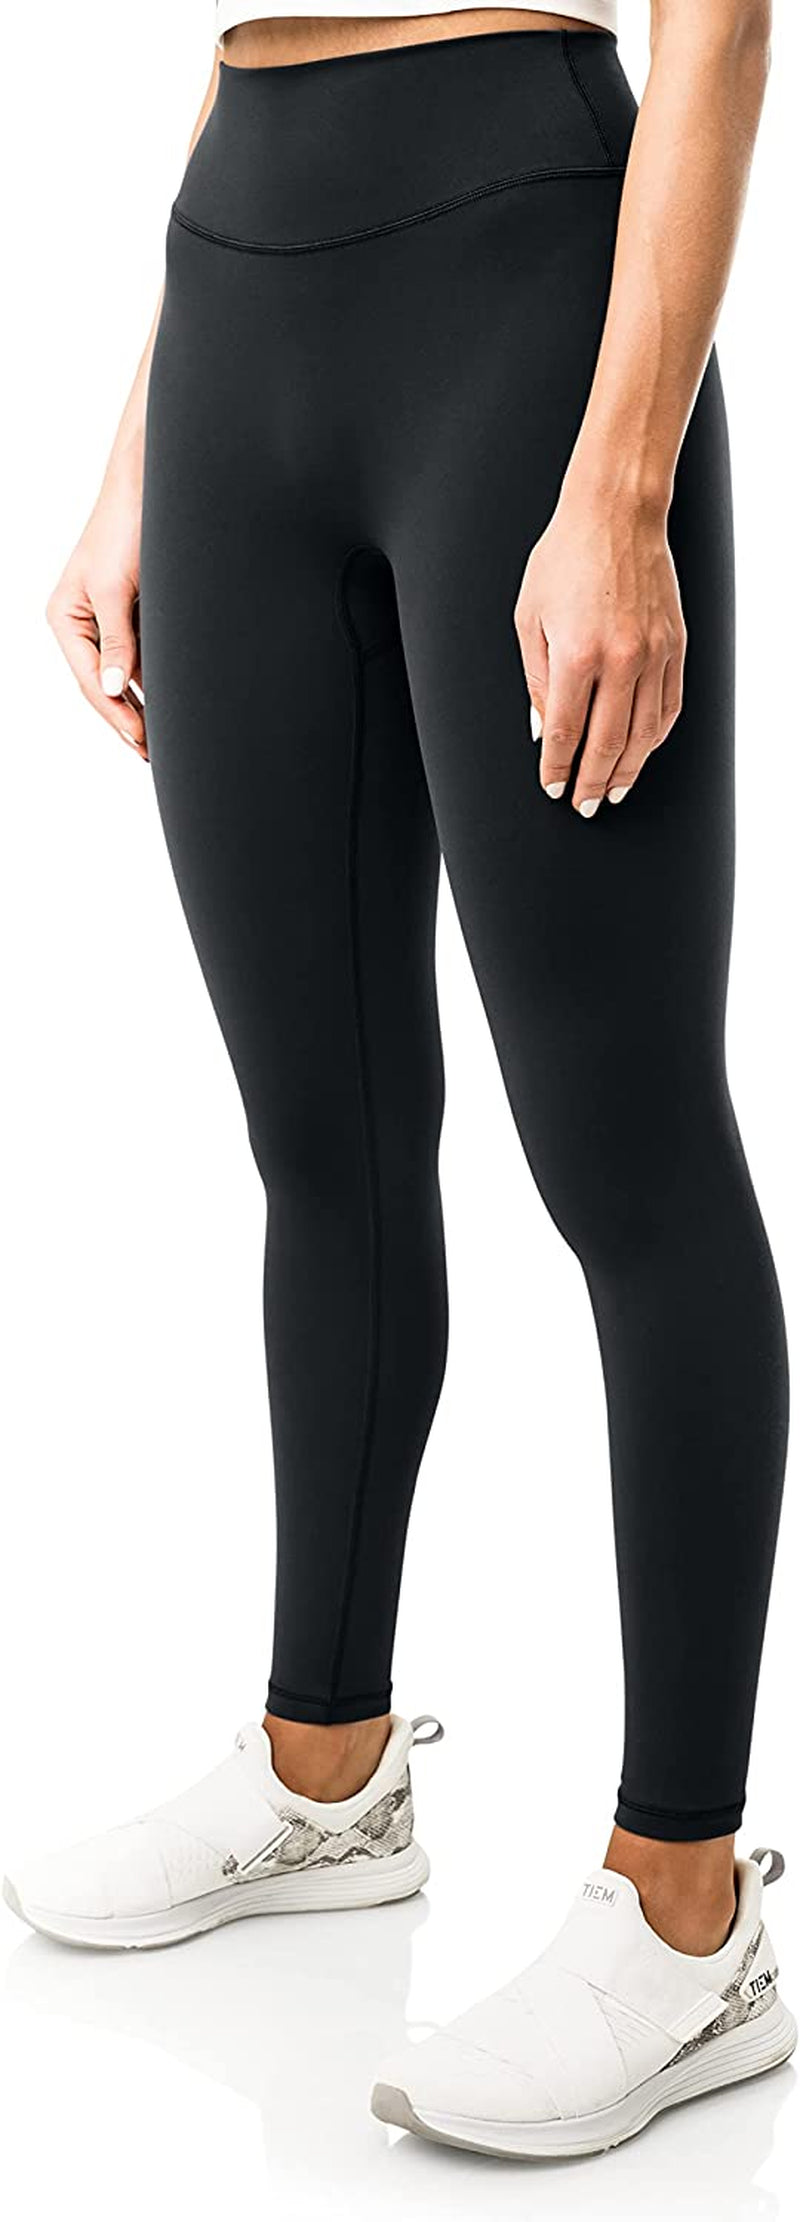 Serenity No Front Seam Leggings 25 Inseam Seamless Yoga Pants High Waisted  Soft Workout Tights